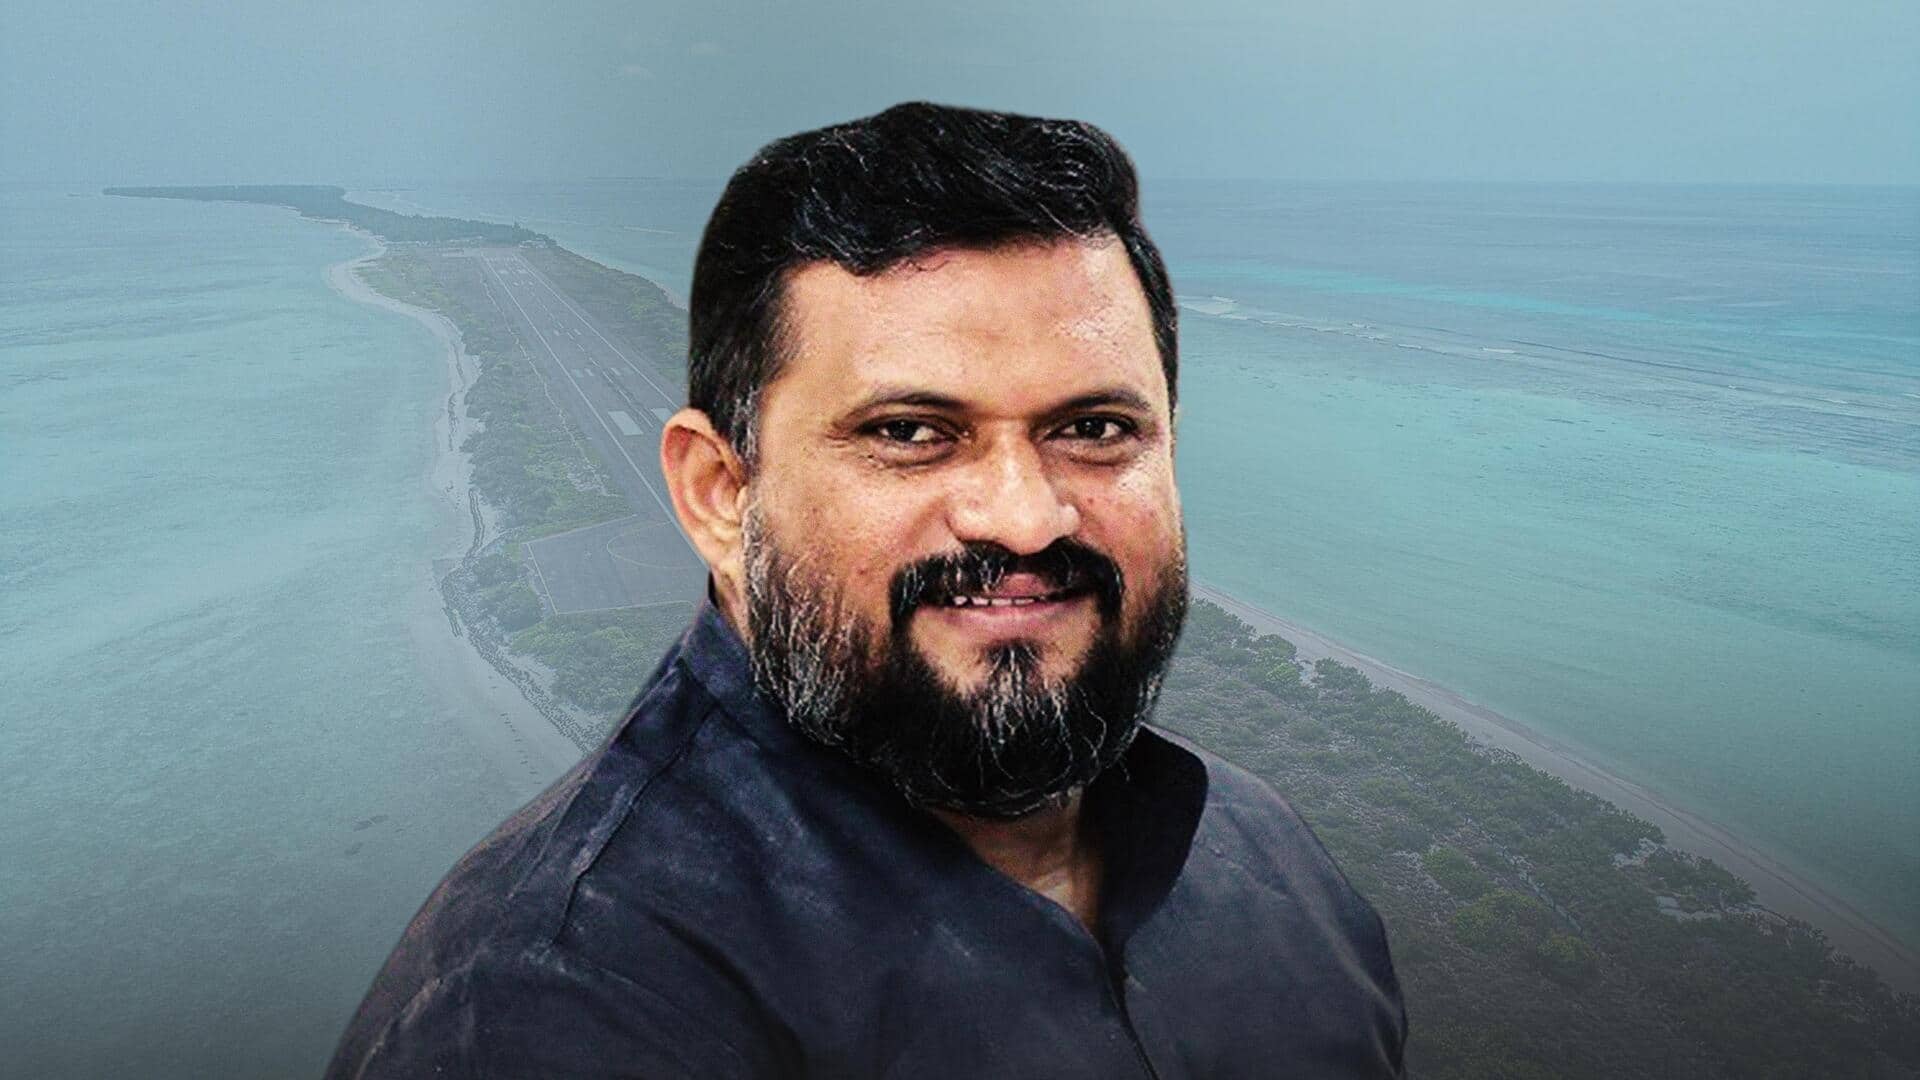 Lakshadweep ecologically fragile, says local MP as tourism interest grows